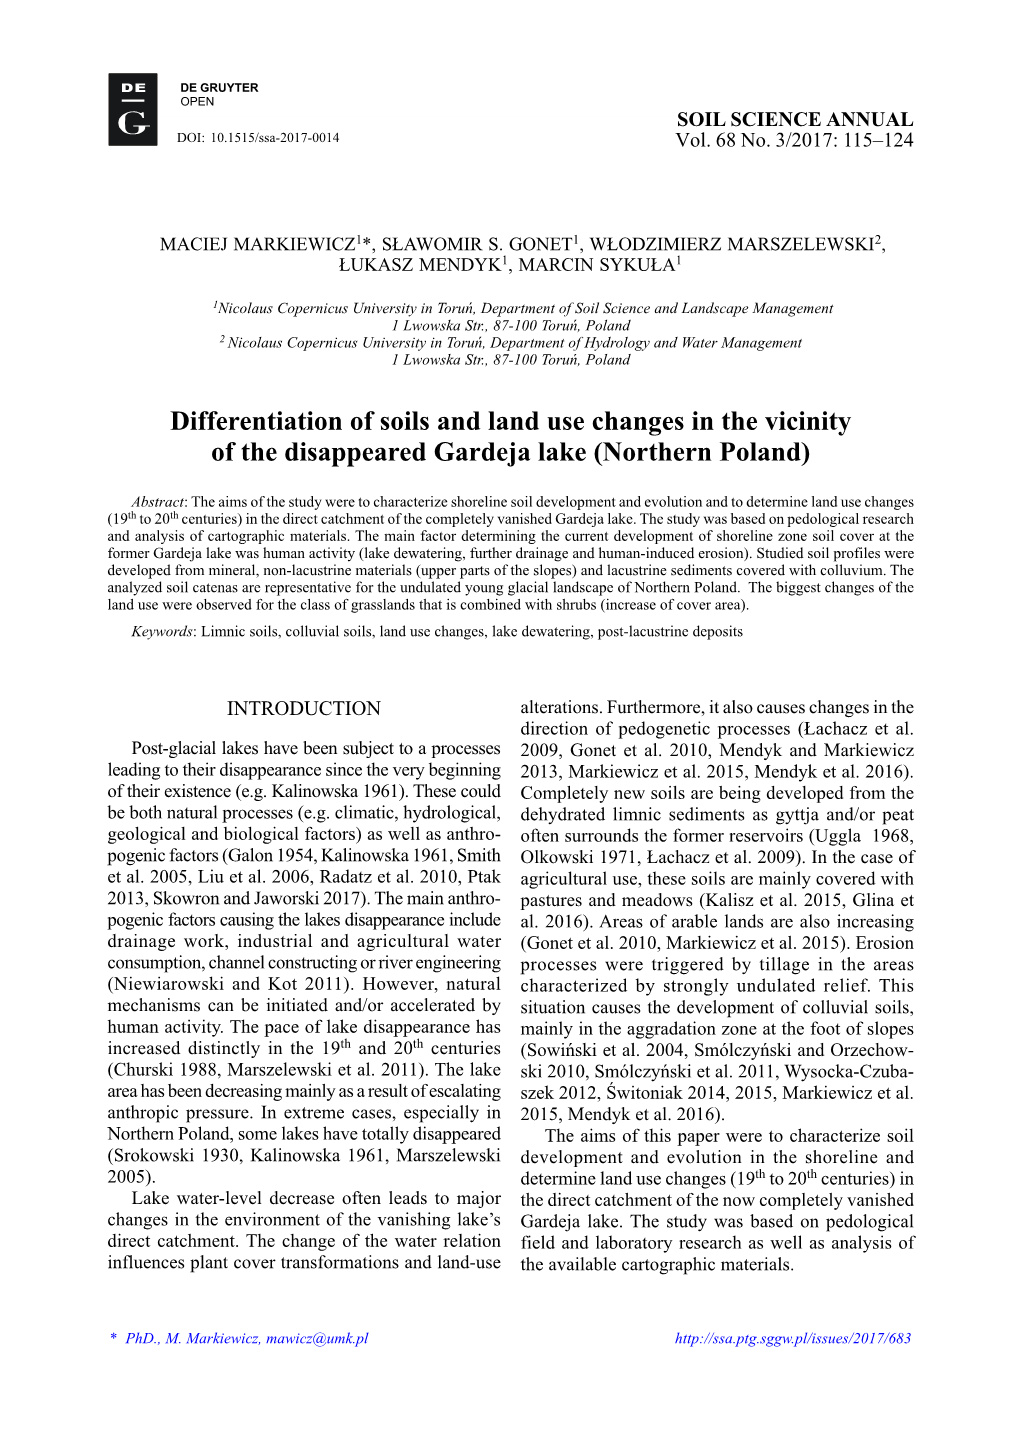 Differentiation of Soils and Land Use Changes in the Vicinity of the Disappeared Gardeja Lake (Northern Poland)